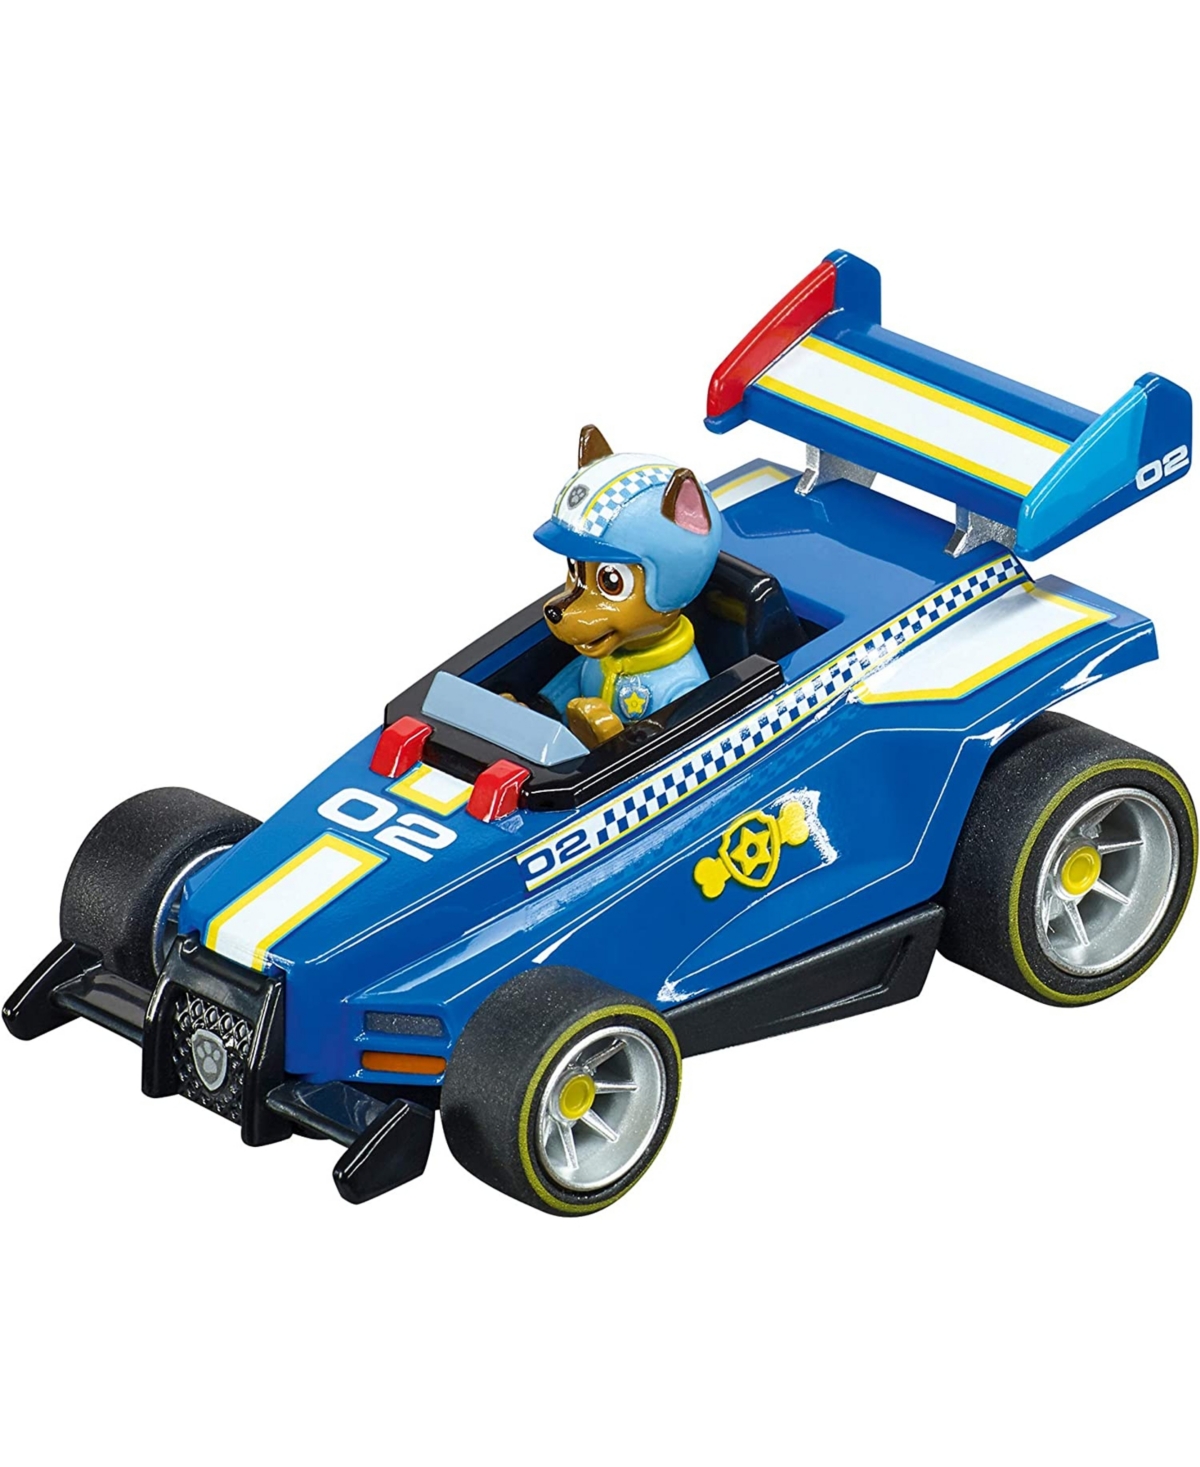 Shop Carrera Official Paw Patrol Battery Operated 1:43 Scale Slot Car Racing Jump Ramp Toy Track Set In No Color